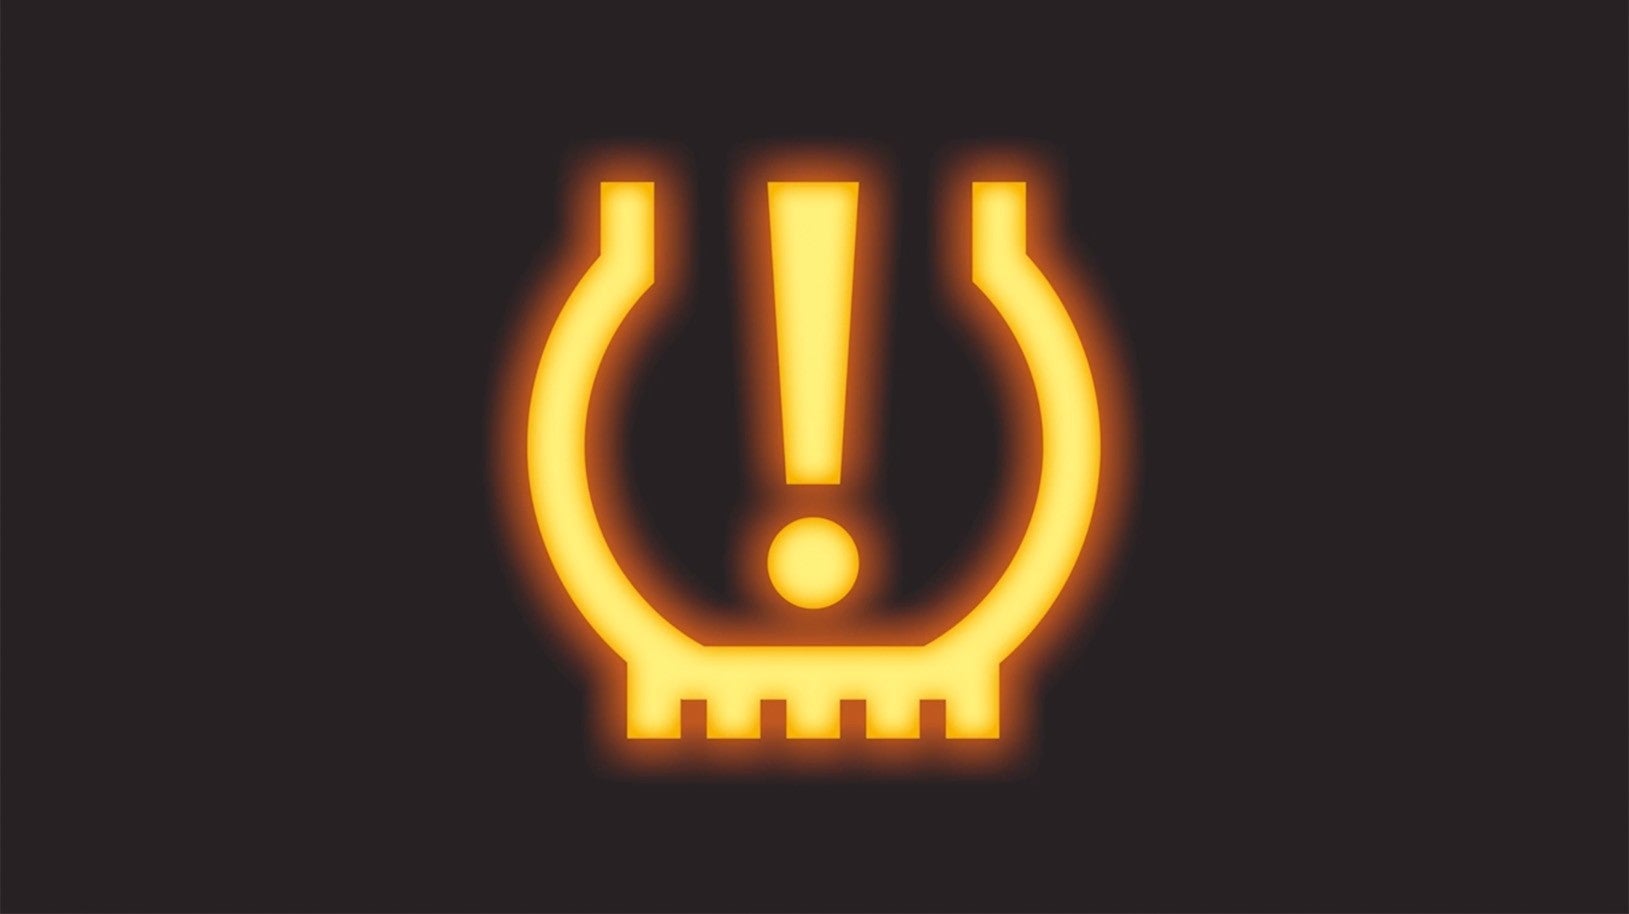  Image of the Tire Pressure Monitoring System Light | Friendship Subaru of Beckley in Mount Hope WV